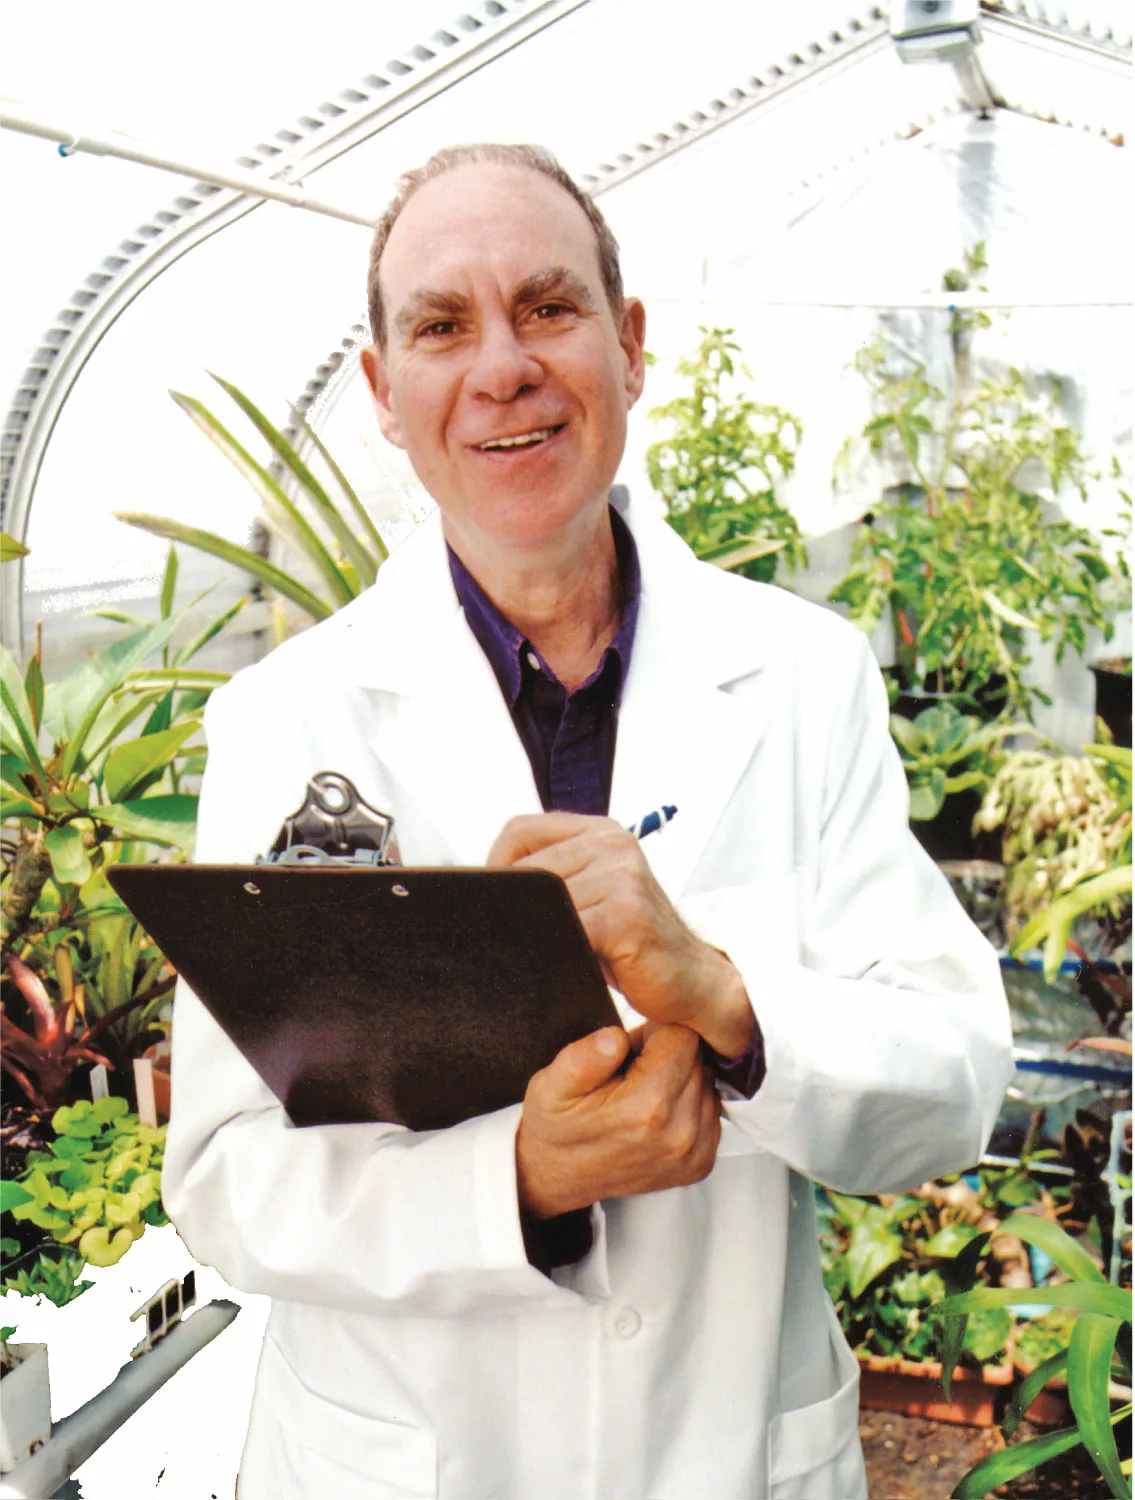 Ed Rosenthal in lab coat in cannabis grow room